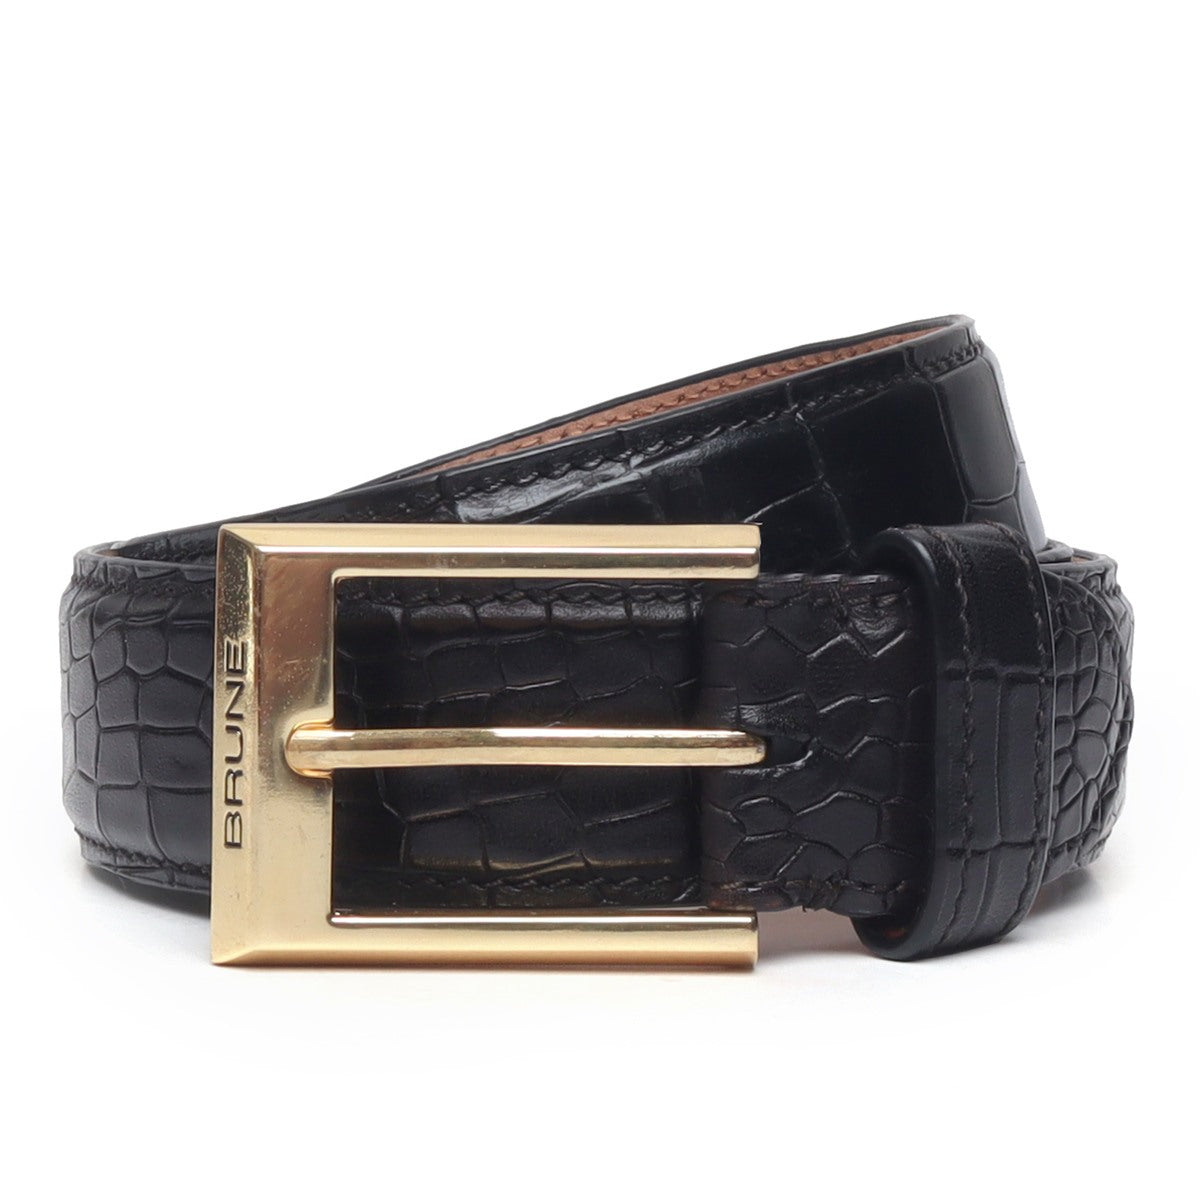 Hand Painted Leather Formal Belt Black Croco With Golden Square Buckle By Brune & Bareskin